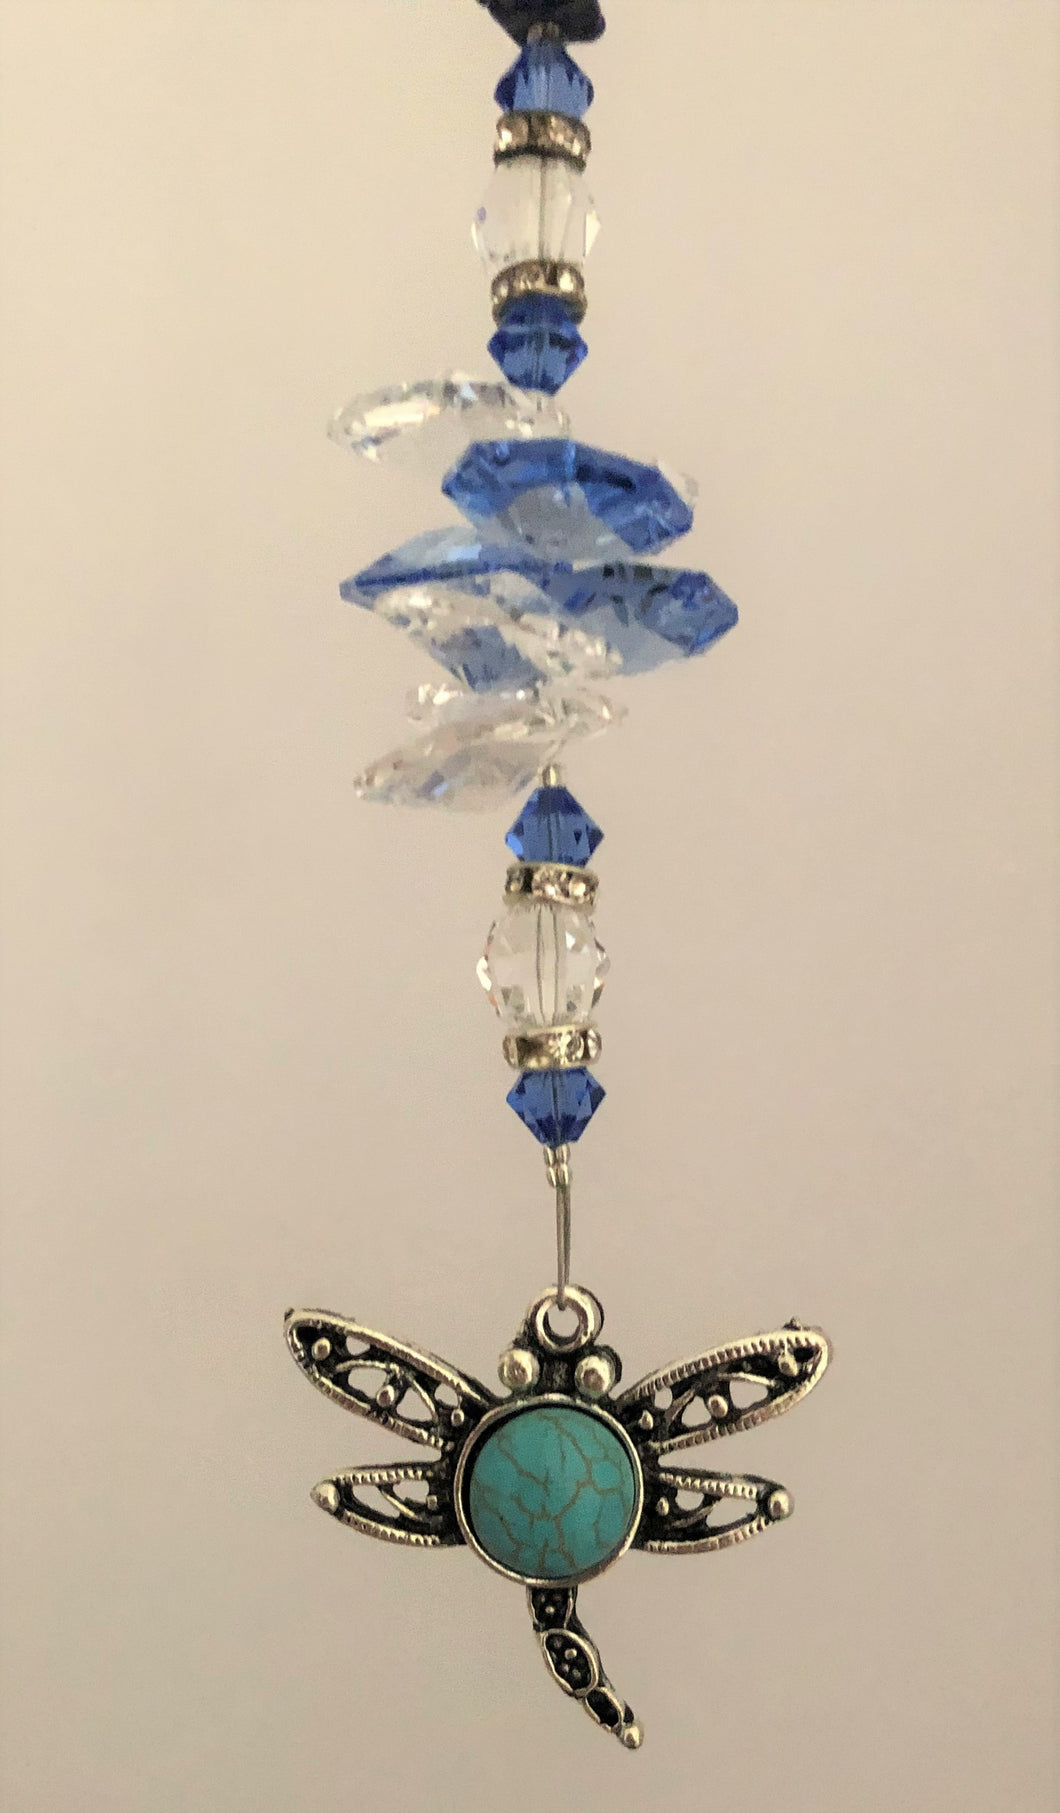 This beautiful Dragonfly  suncatcher which is decorated with crystals and Lapis Lazuli